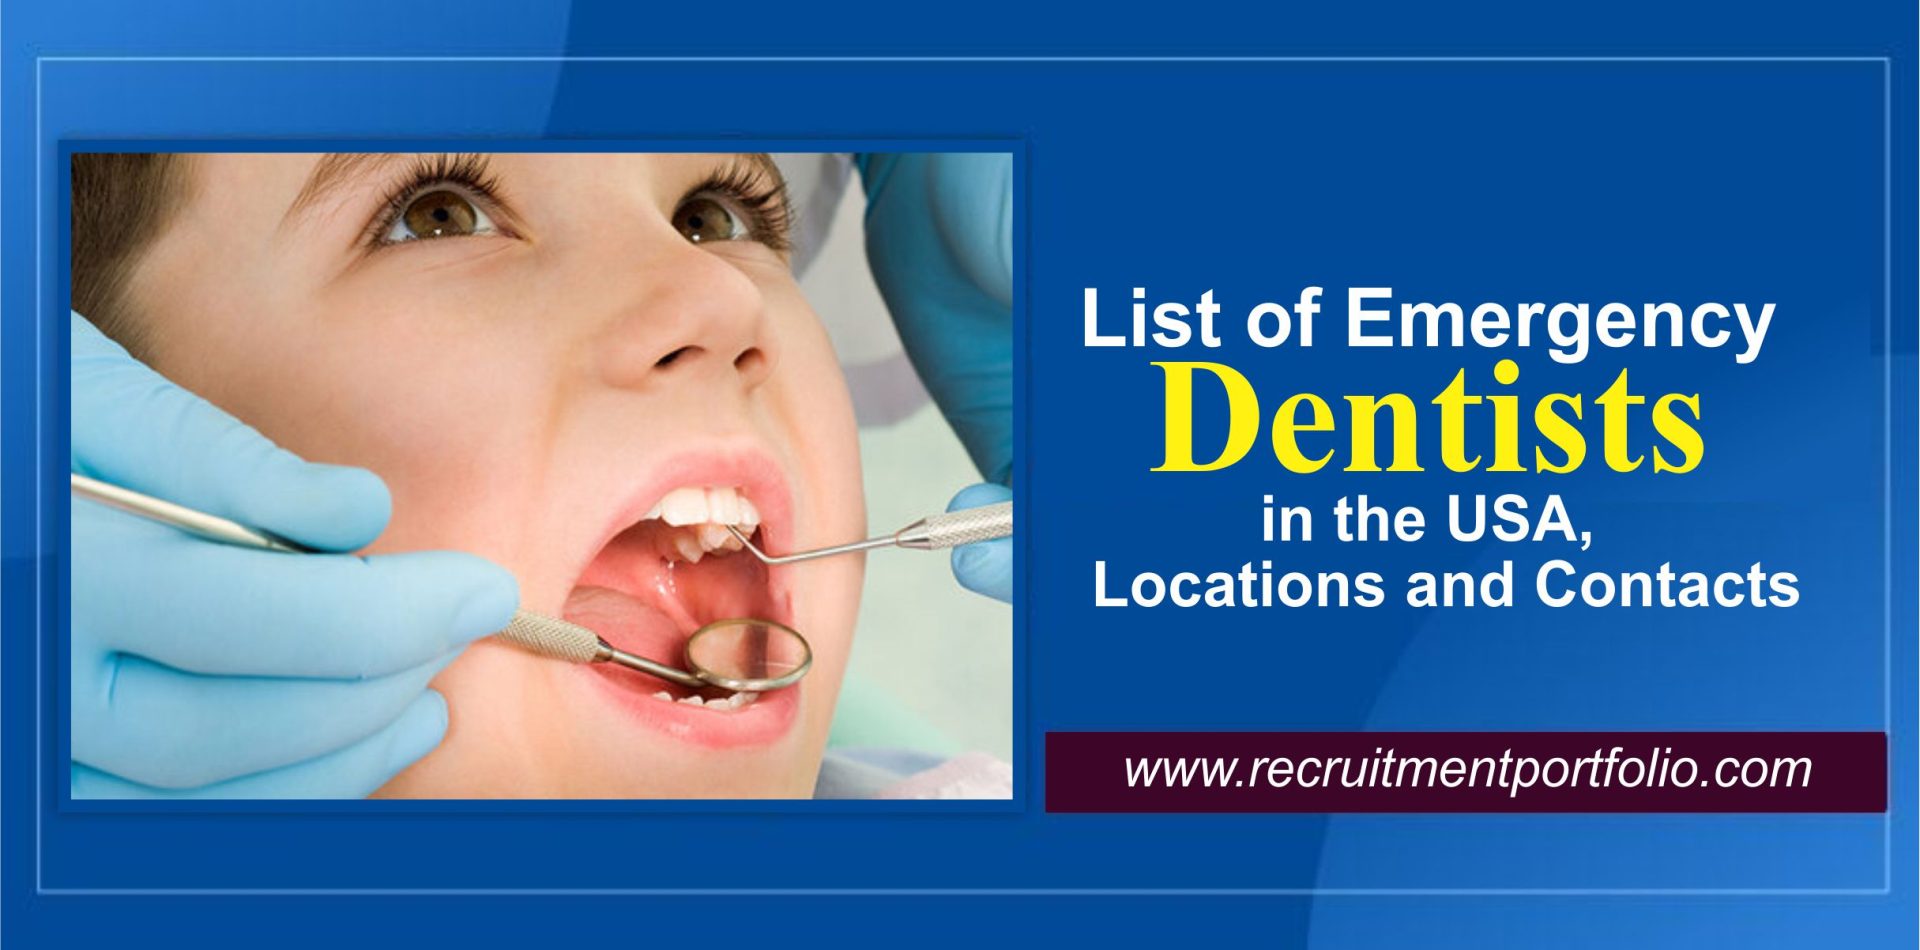 List of Emergency Dentists in the USA, Locations and Contacts 